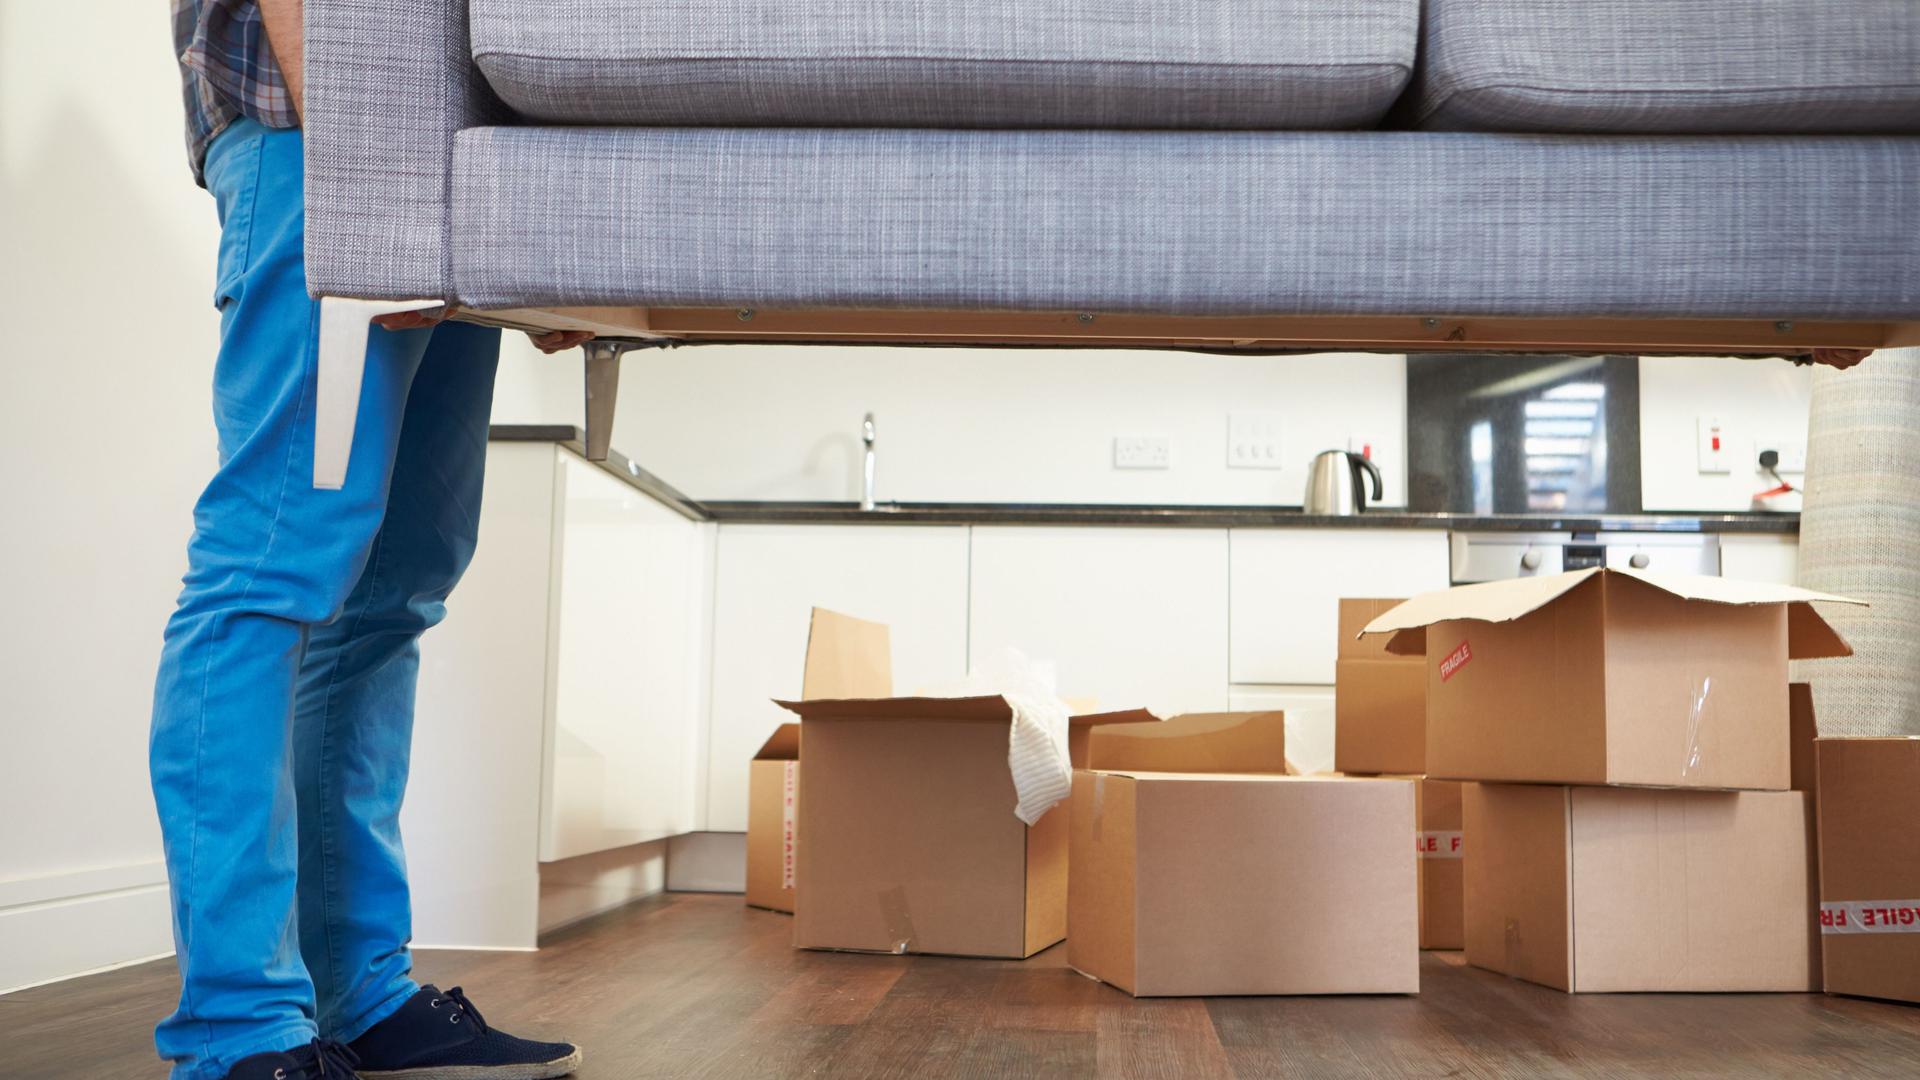 Don't take apart your own furniture if you want the removals people to put it back together. Photo: Shutterstock